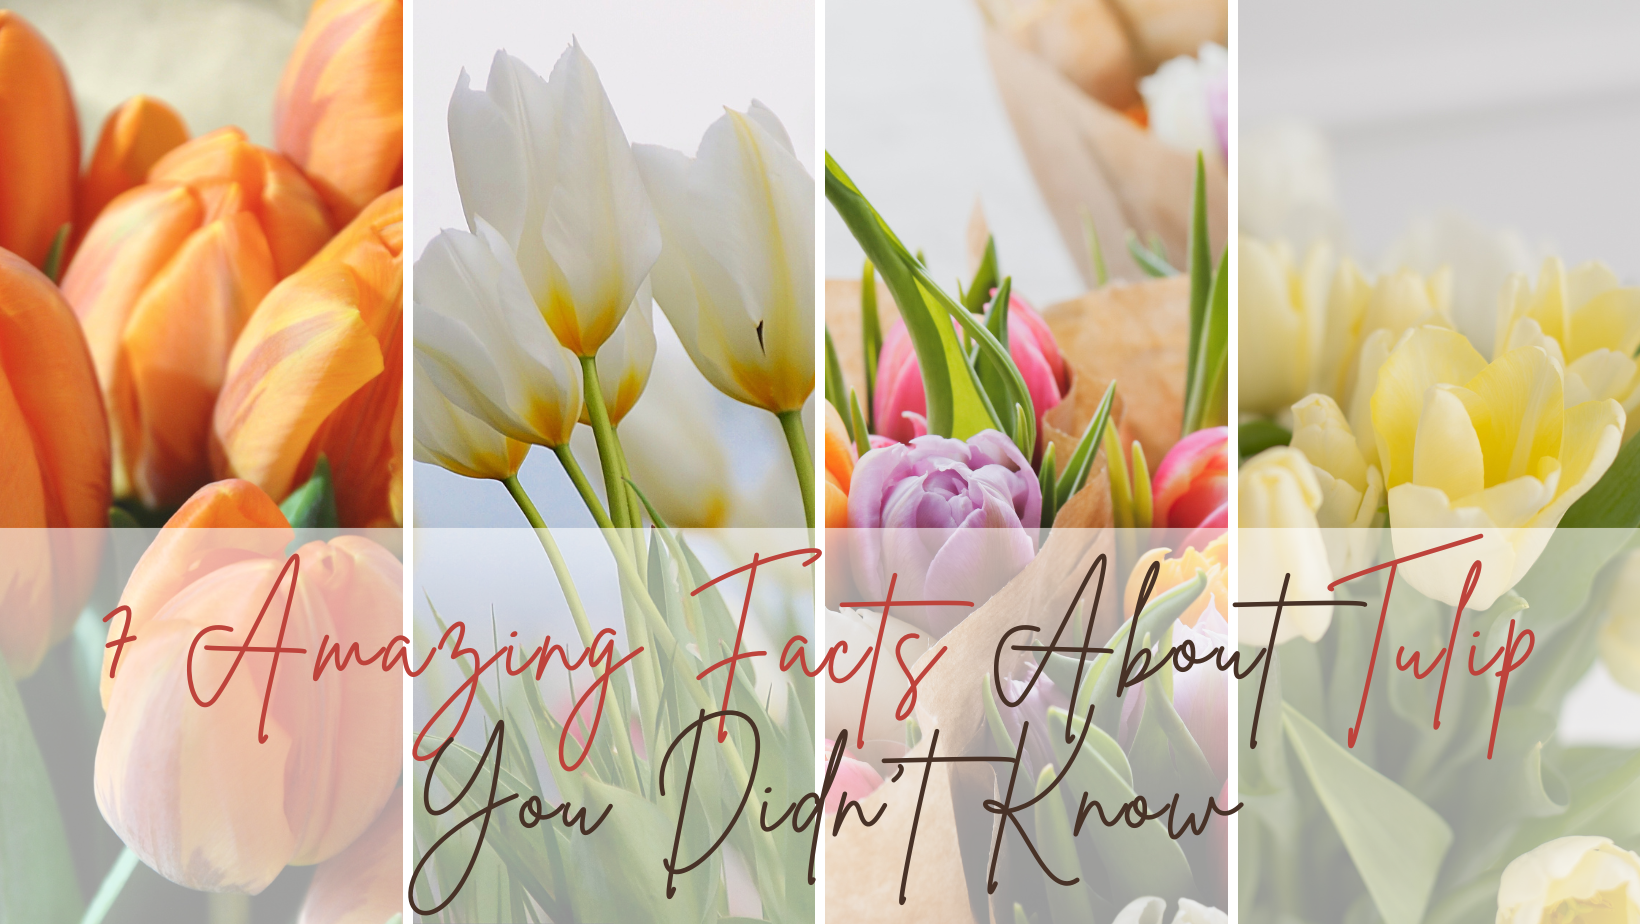 7 Facts Every Tulip Lover Should Know